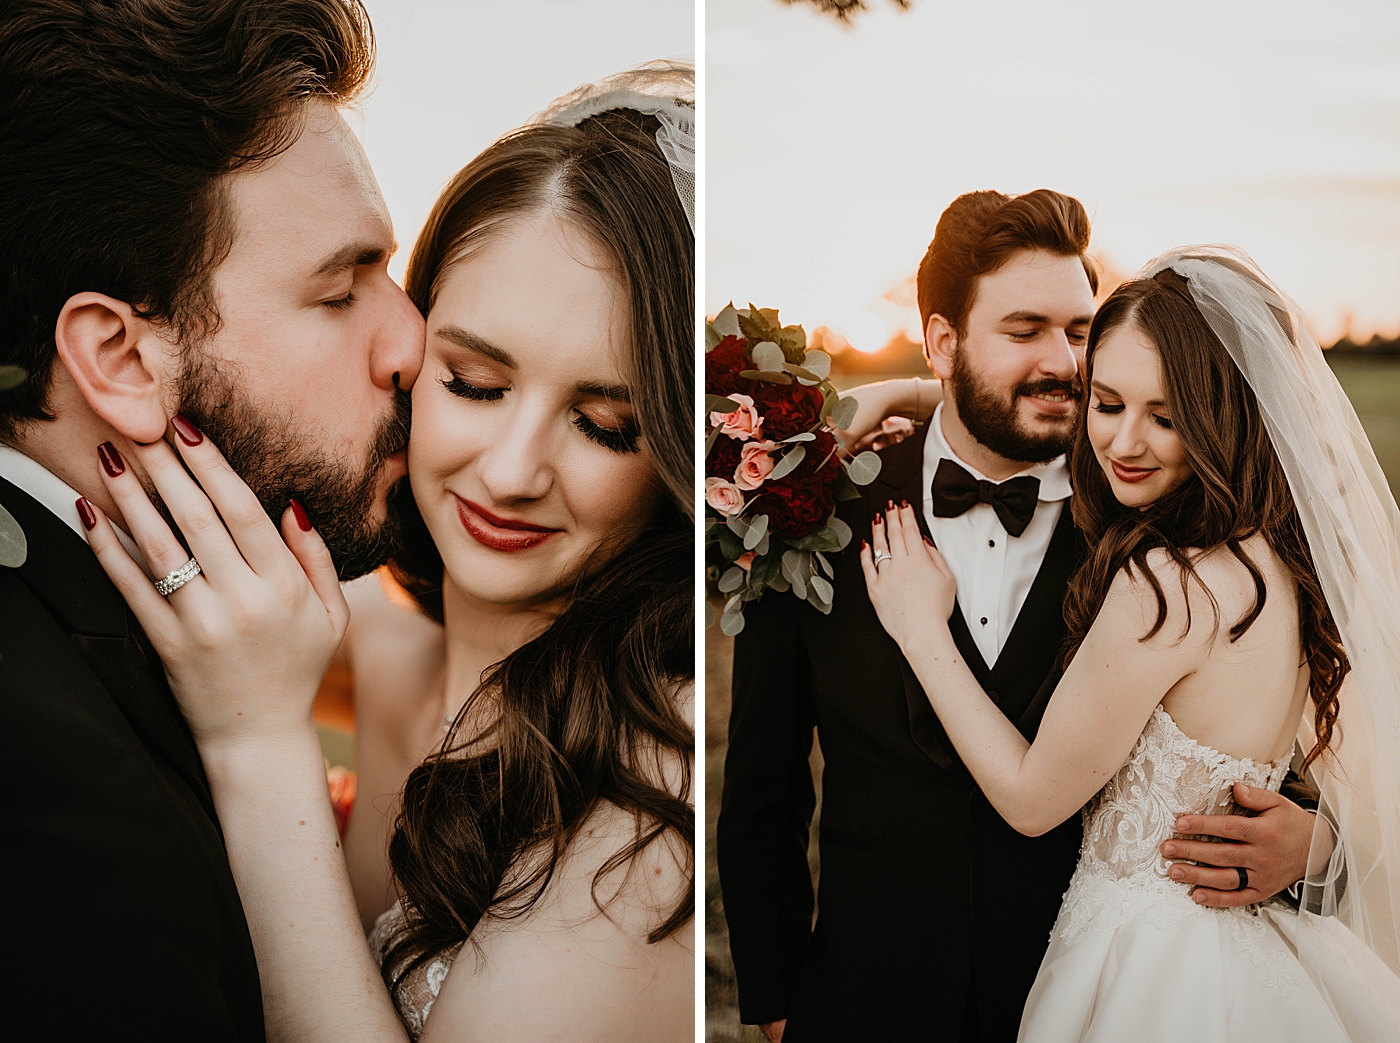 Closeup portrait of Groom kissing Bride on cheek and Bride holding Groom and red bouquet as the sun sets Romantic Winter Wedding captured NYC Wedding Planner Poppy and Lynn